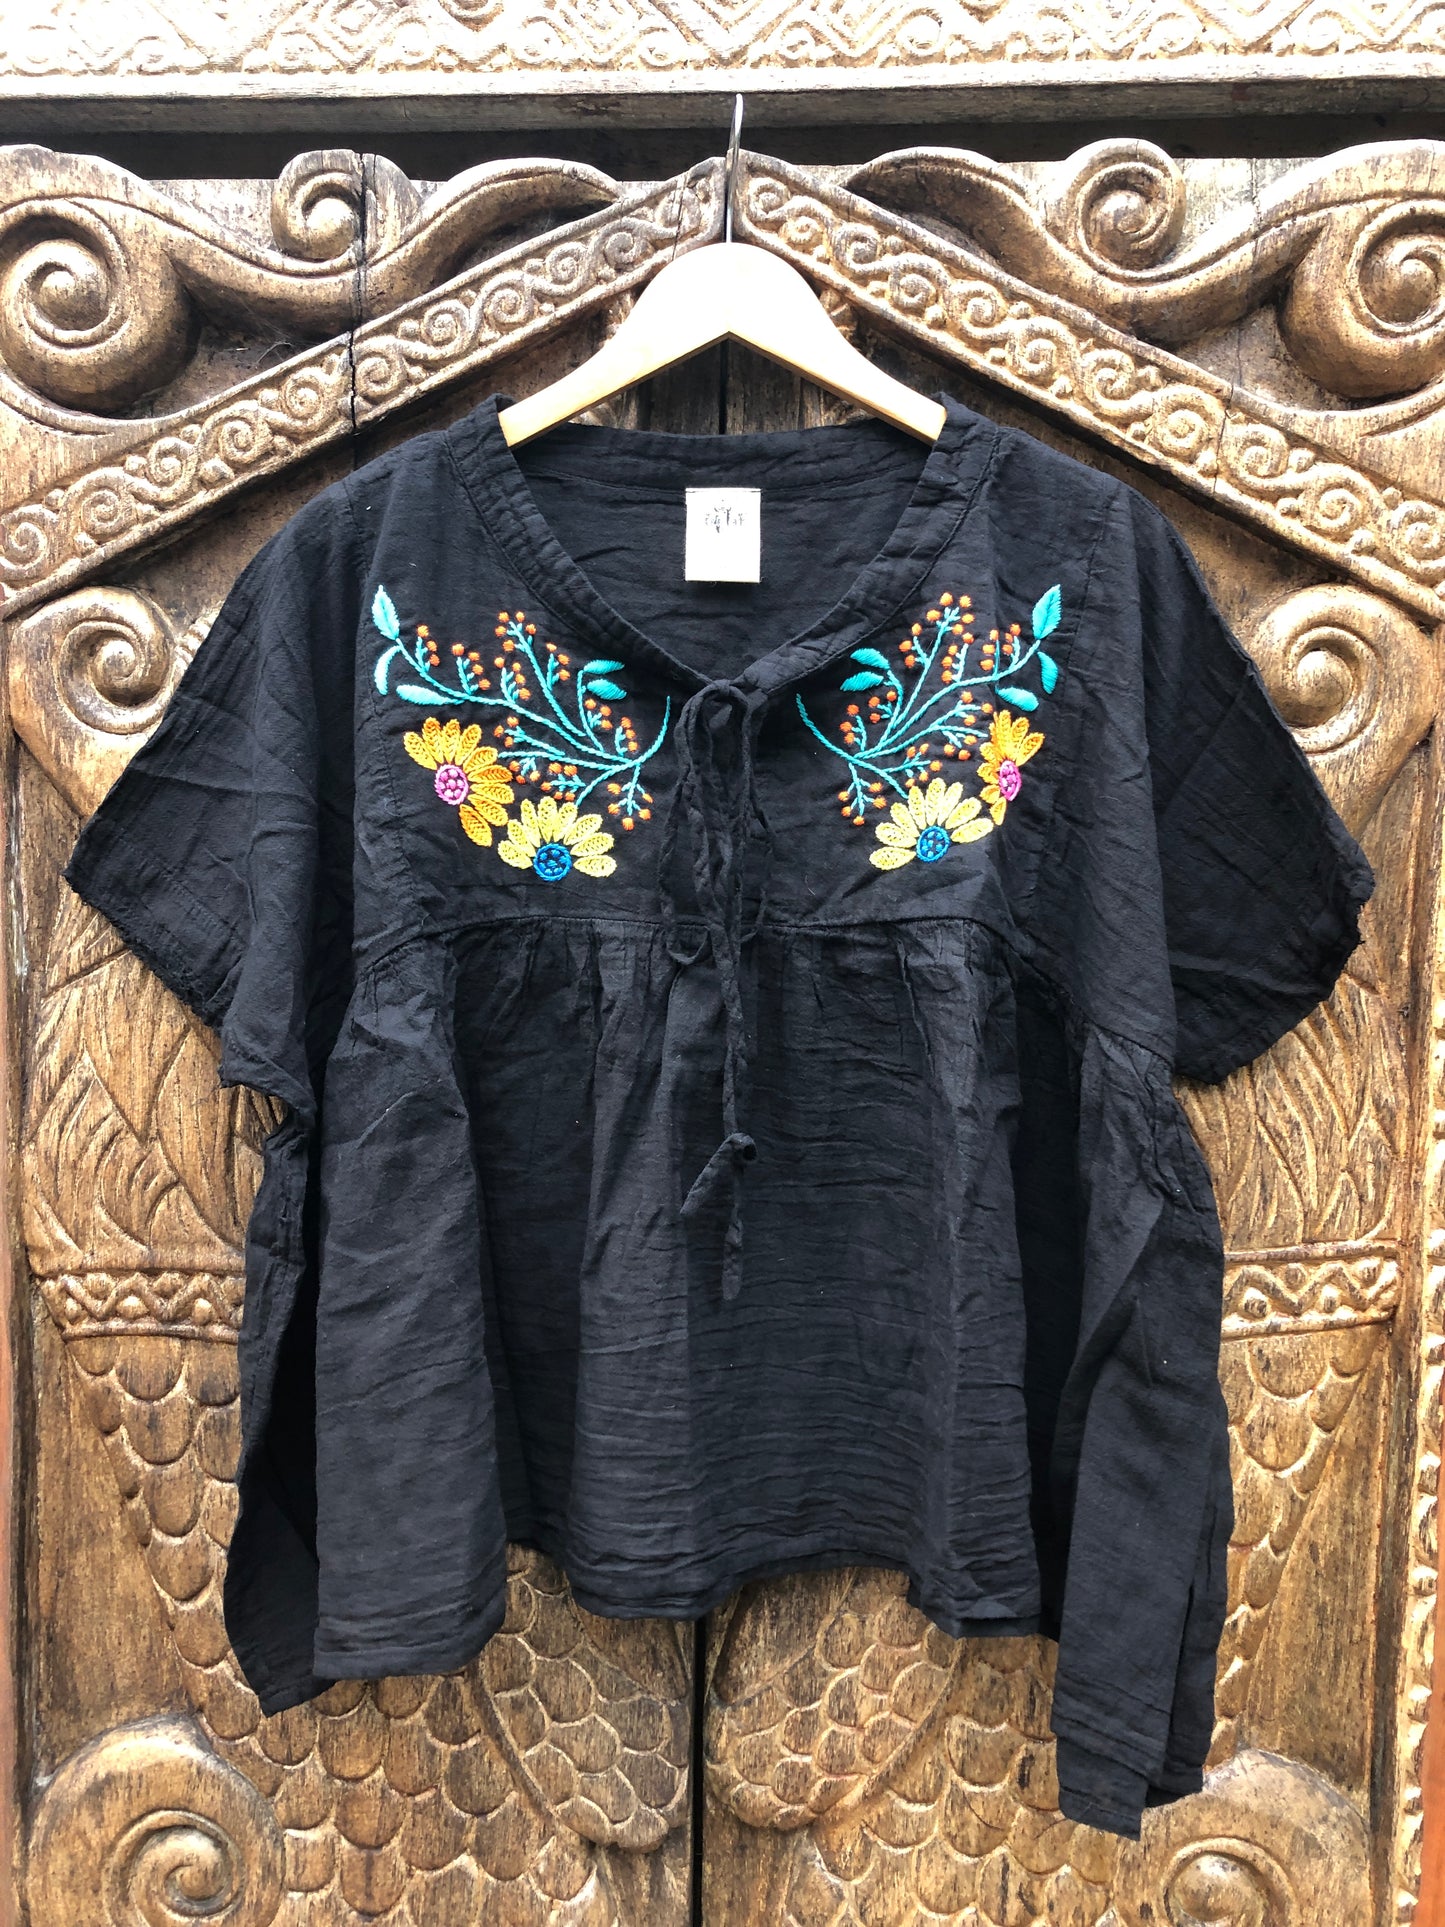 Karuna Blouse - Mexican Fiesta Black with Orange and Yellow Petals